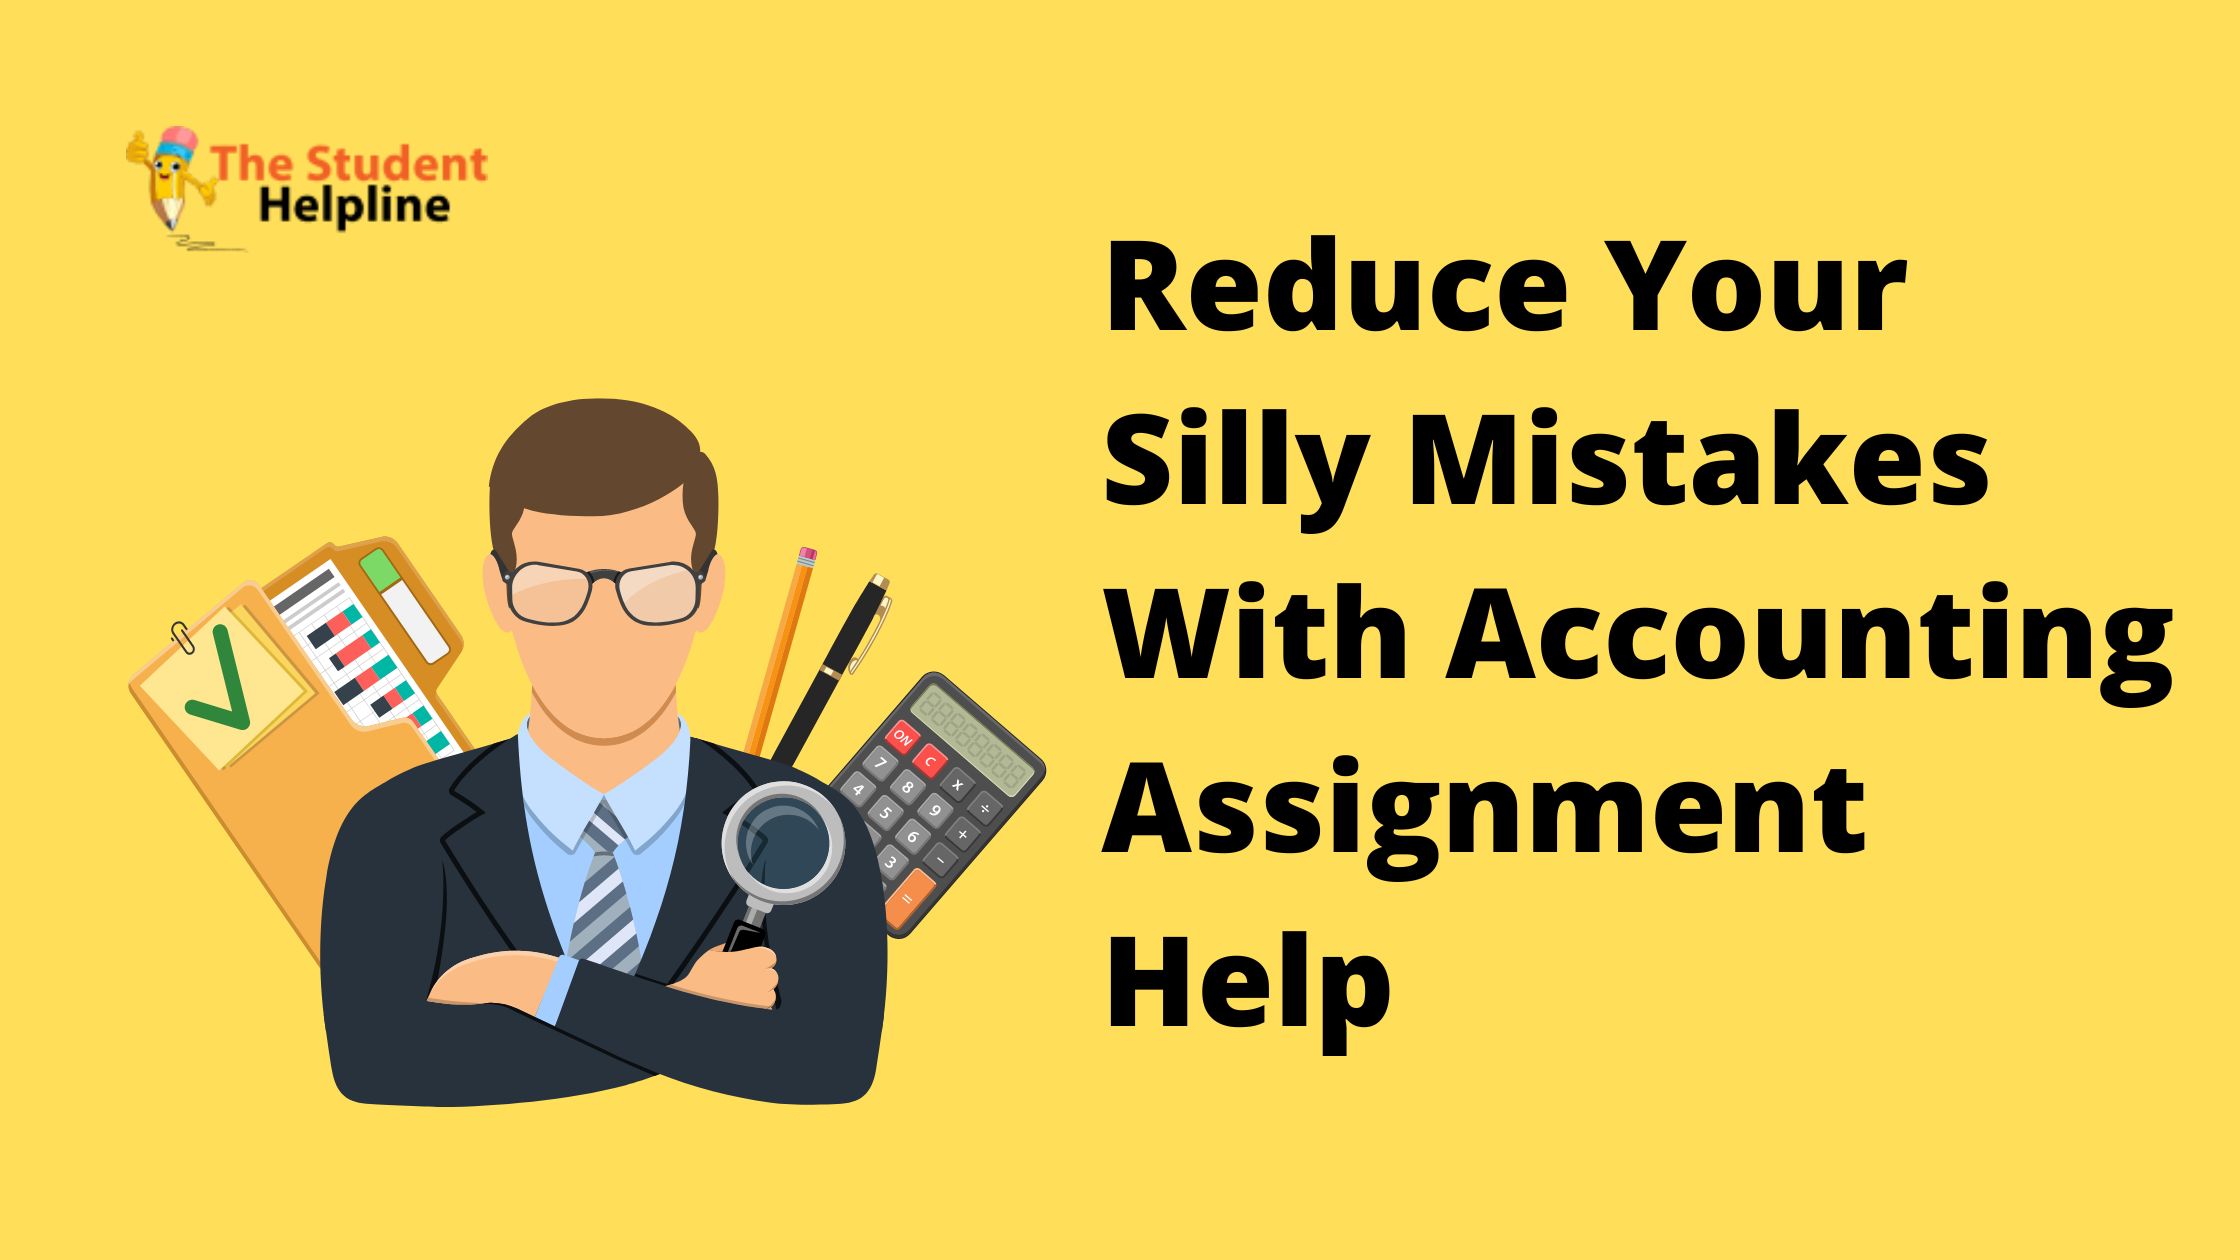 Reduce Your Silly Mistakes With Accounting Assignment Help